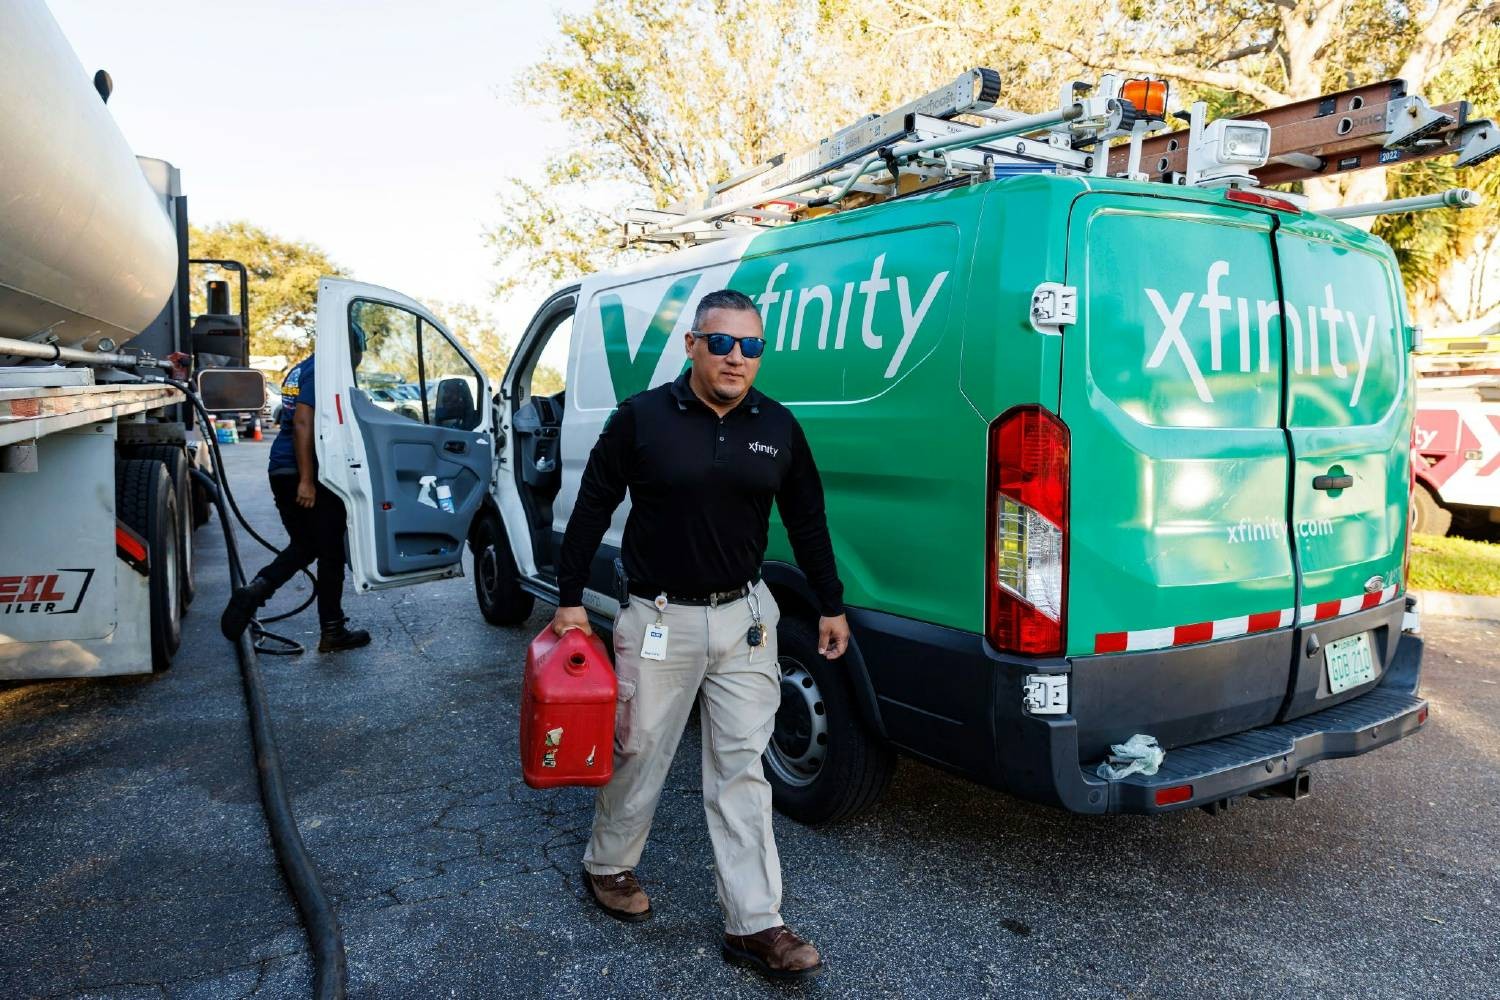 Comcast NBCUniversal announced a $2 million donation to support relief and recovery efforts in FL after Hurricane Ian.